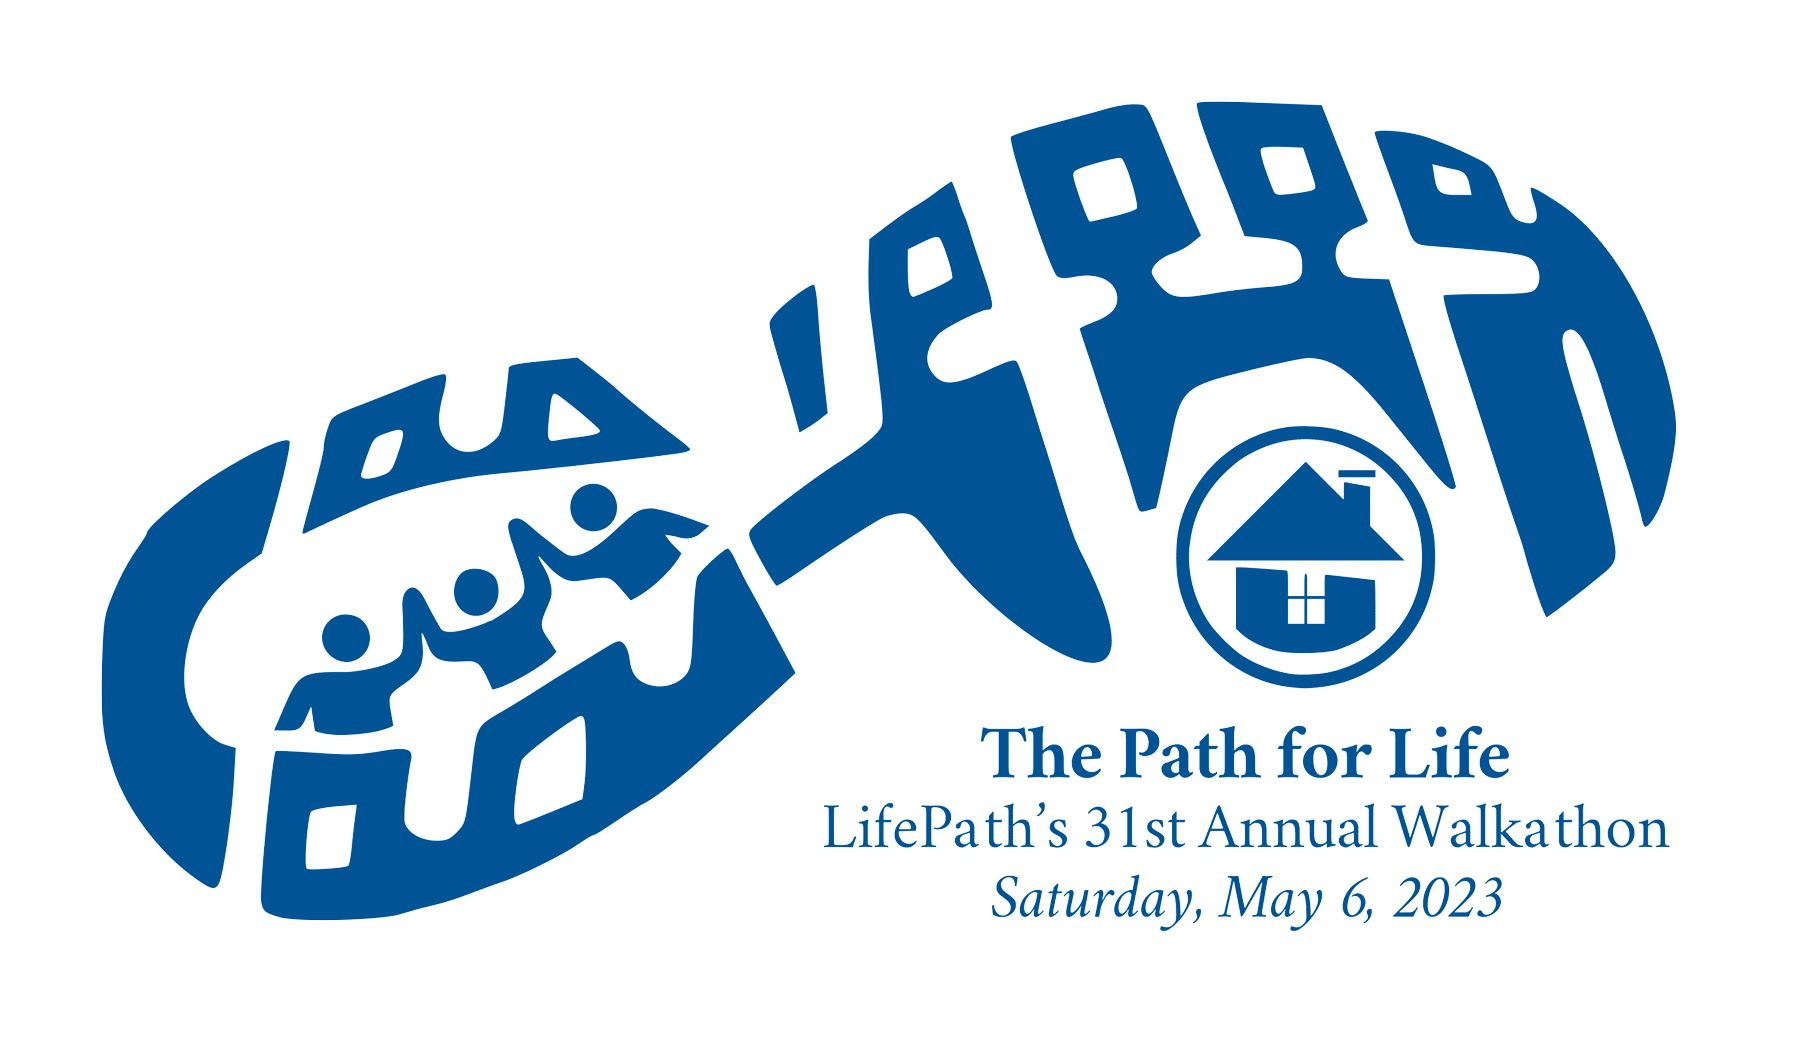 The Path for Life: LifePath's 31st Annual Walkathon, May 6, 2023